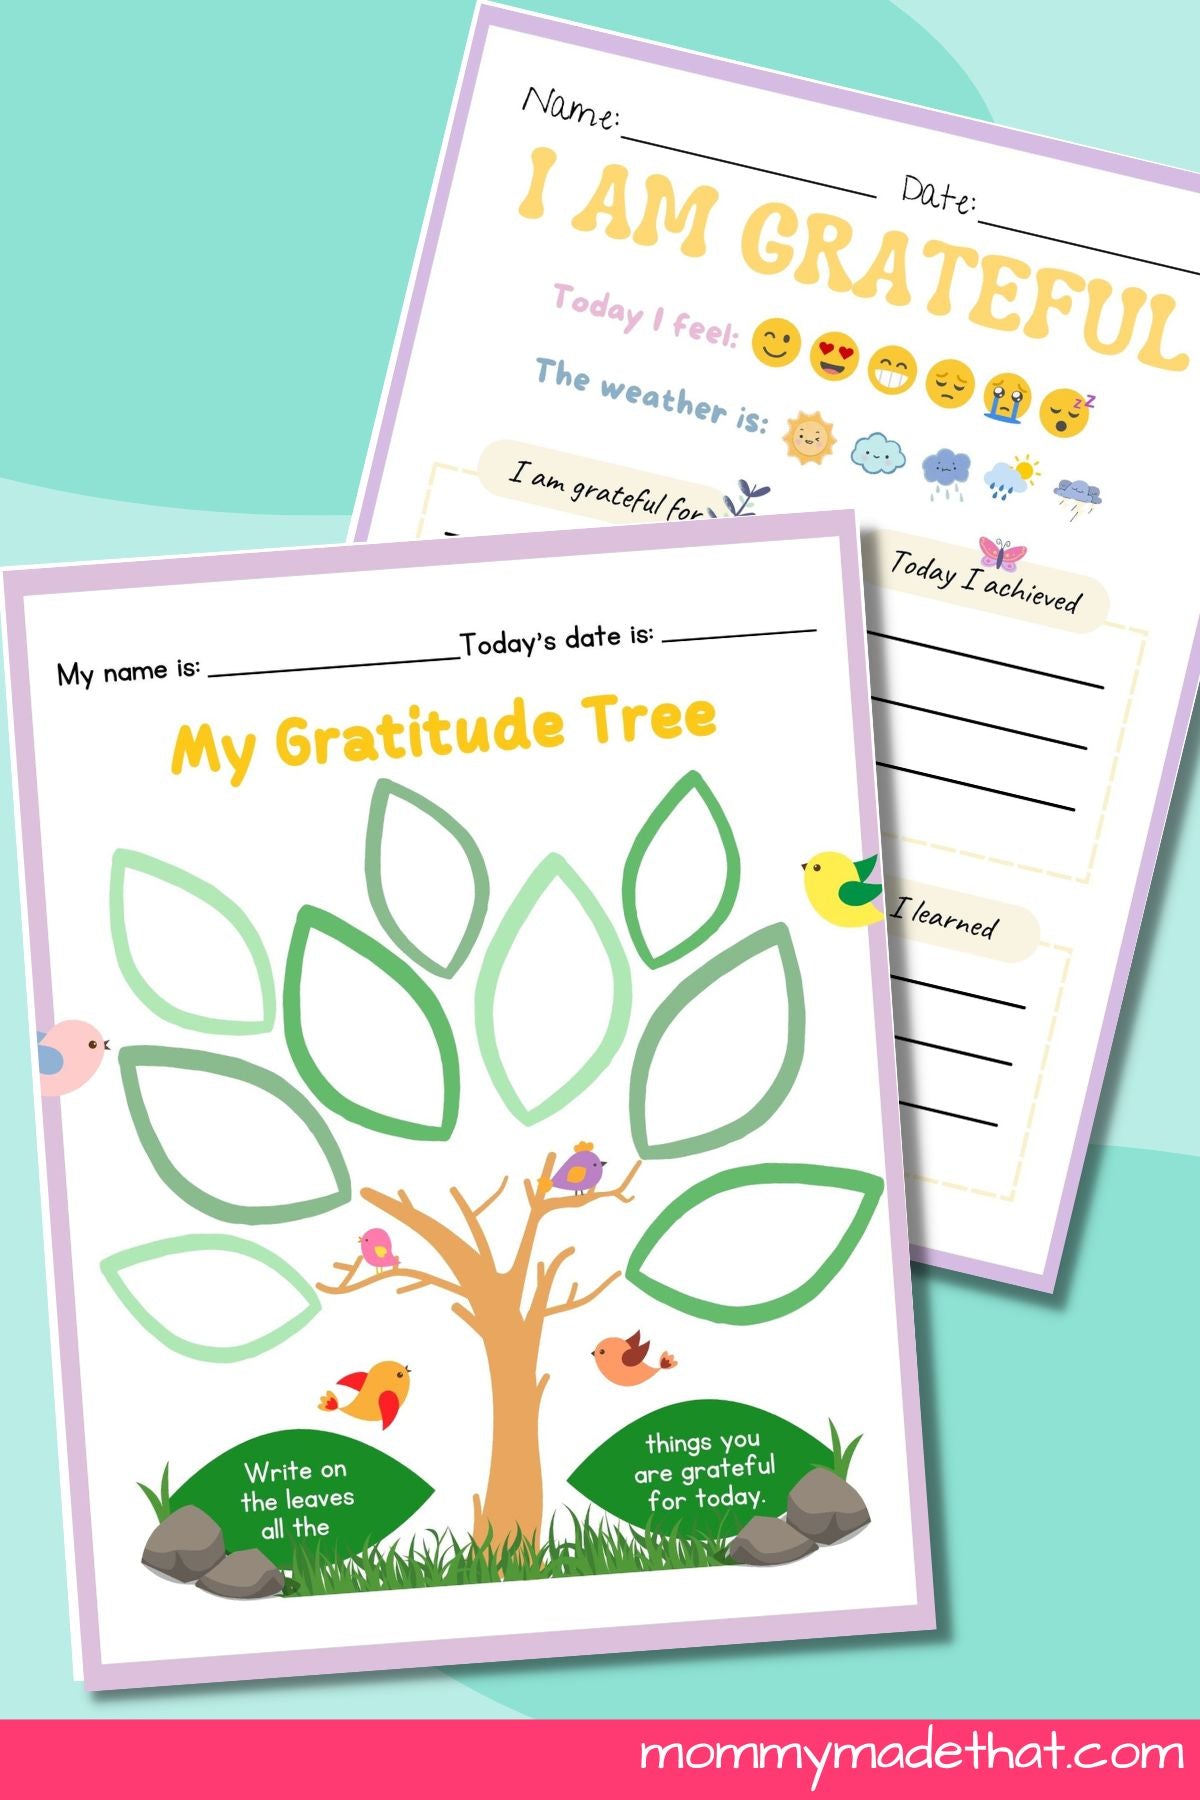 Gratitude Journals for Kids by Learning with Miss Liz